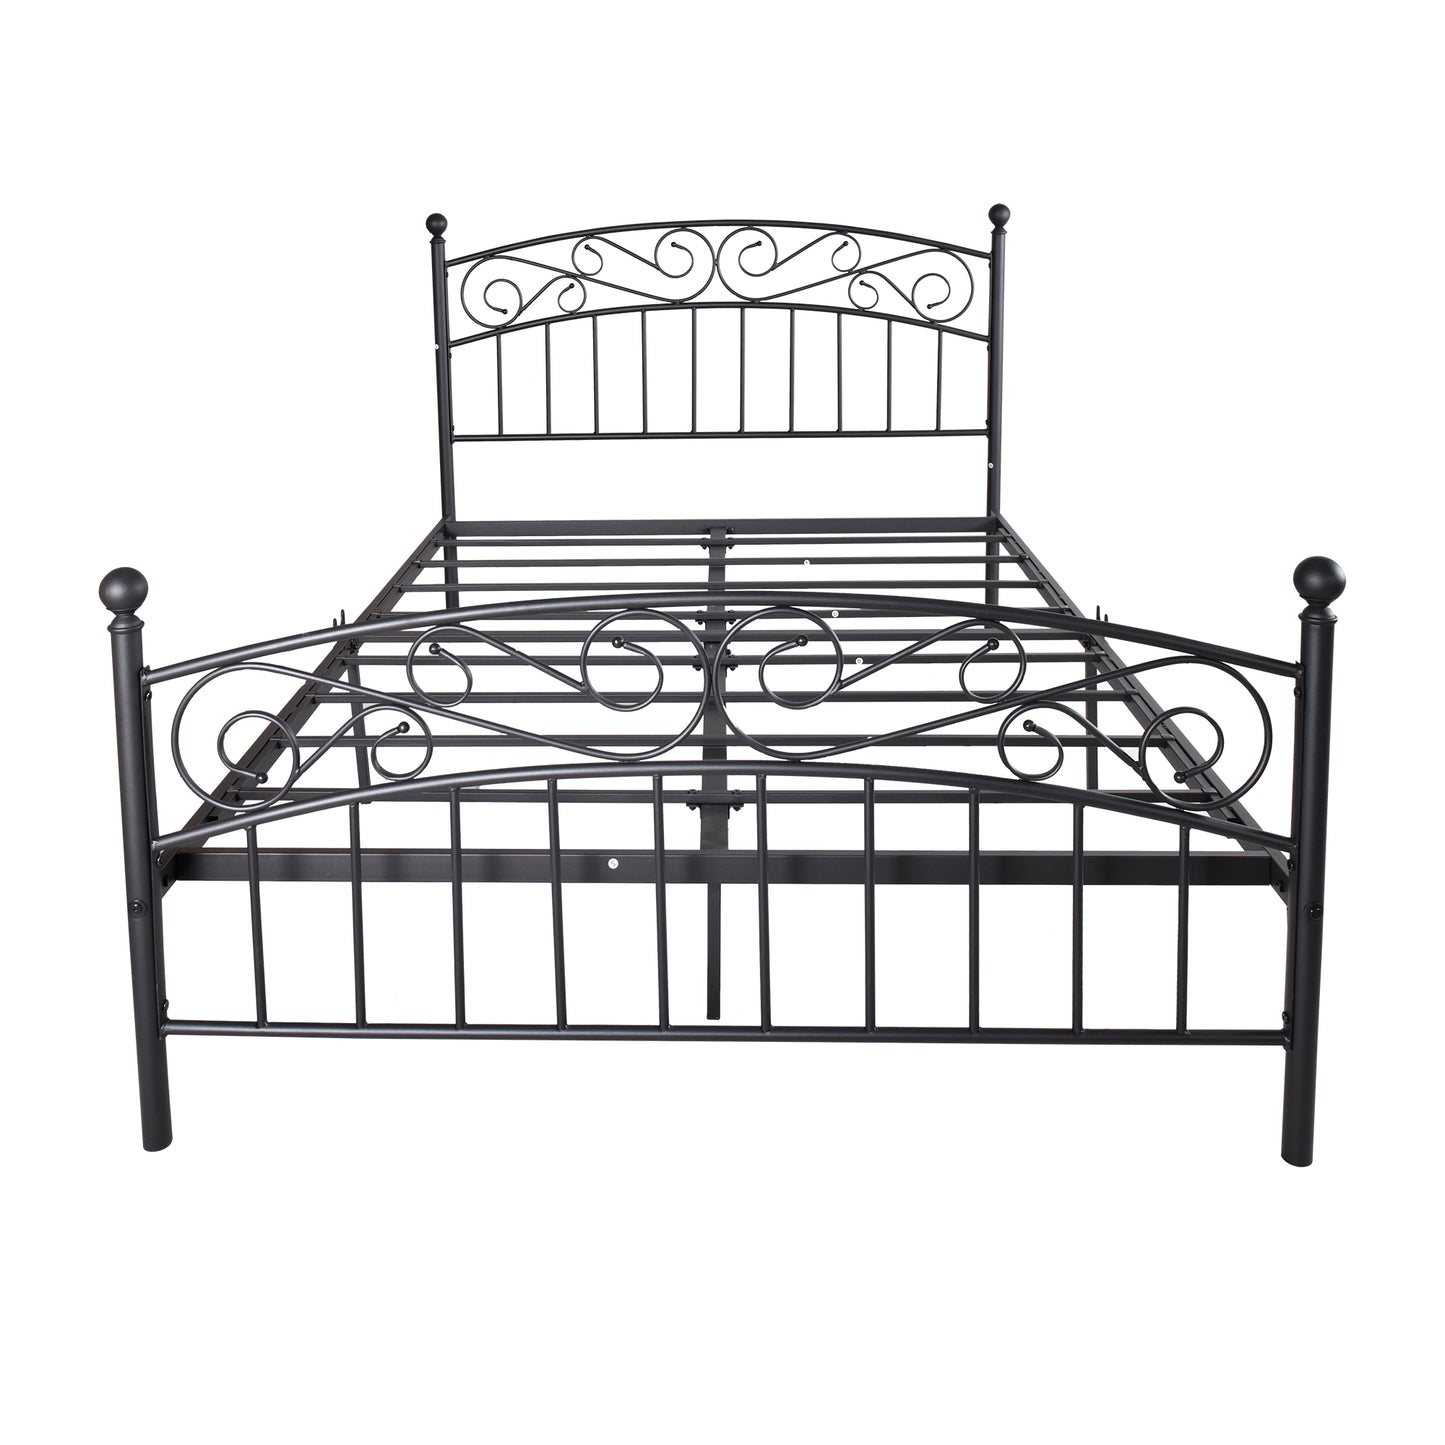 Heavy Duty Quick Assembly Metal Bed Frame with Headboard and Footboard